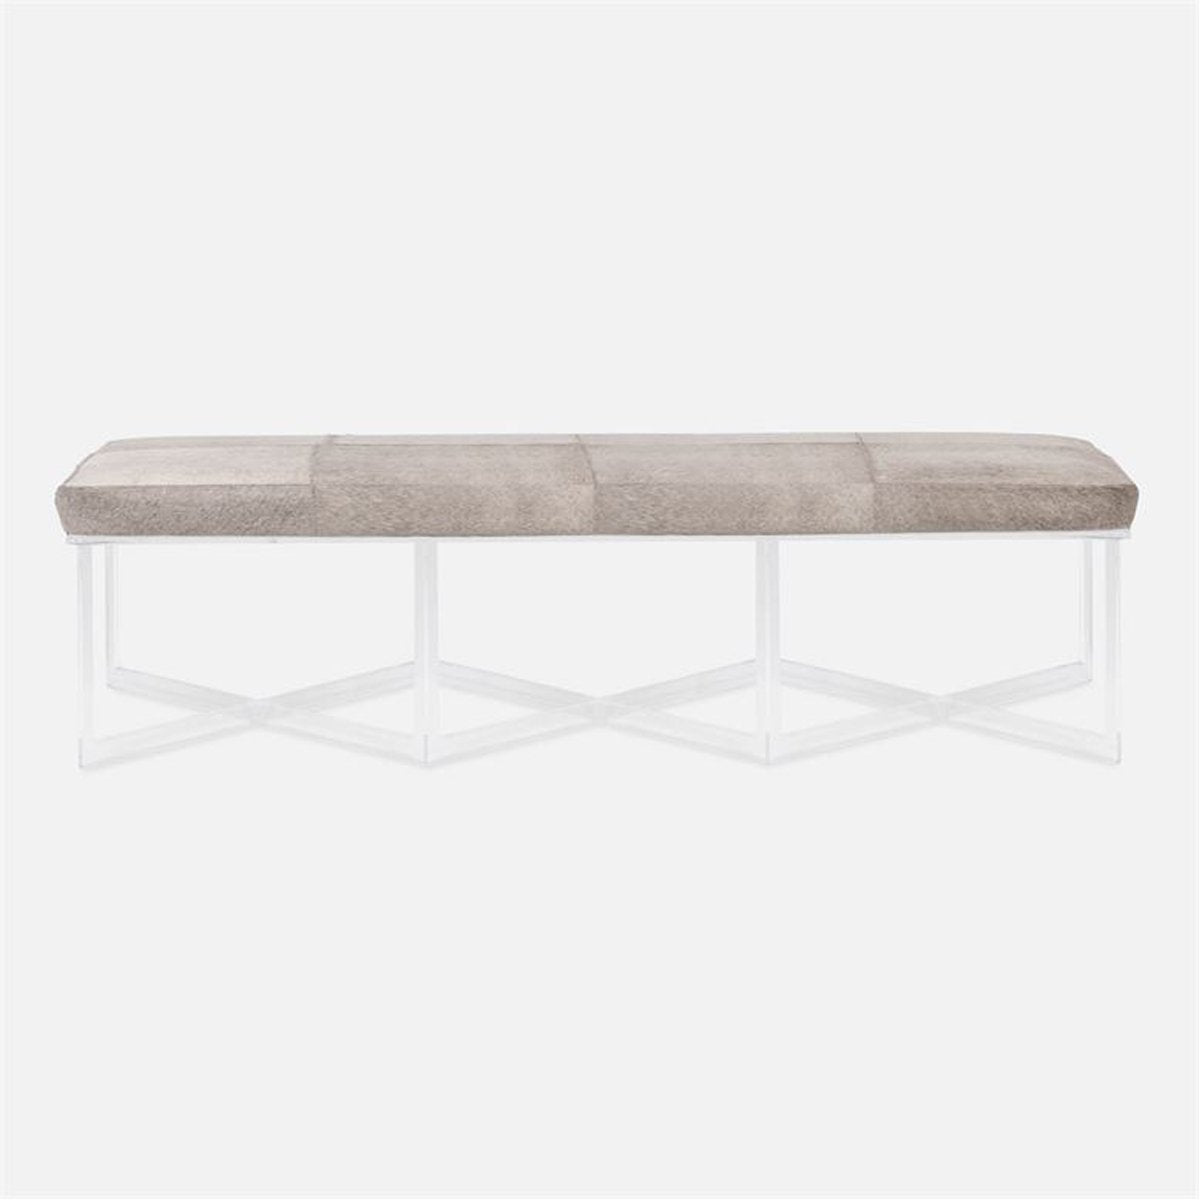 Made Goods Lex Clear Acrylic Triple Bench in Arno Fabric